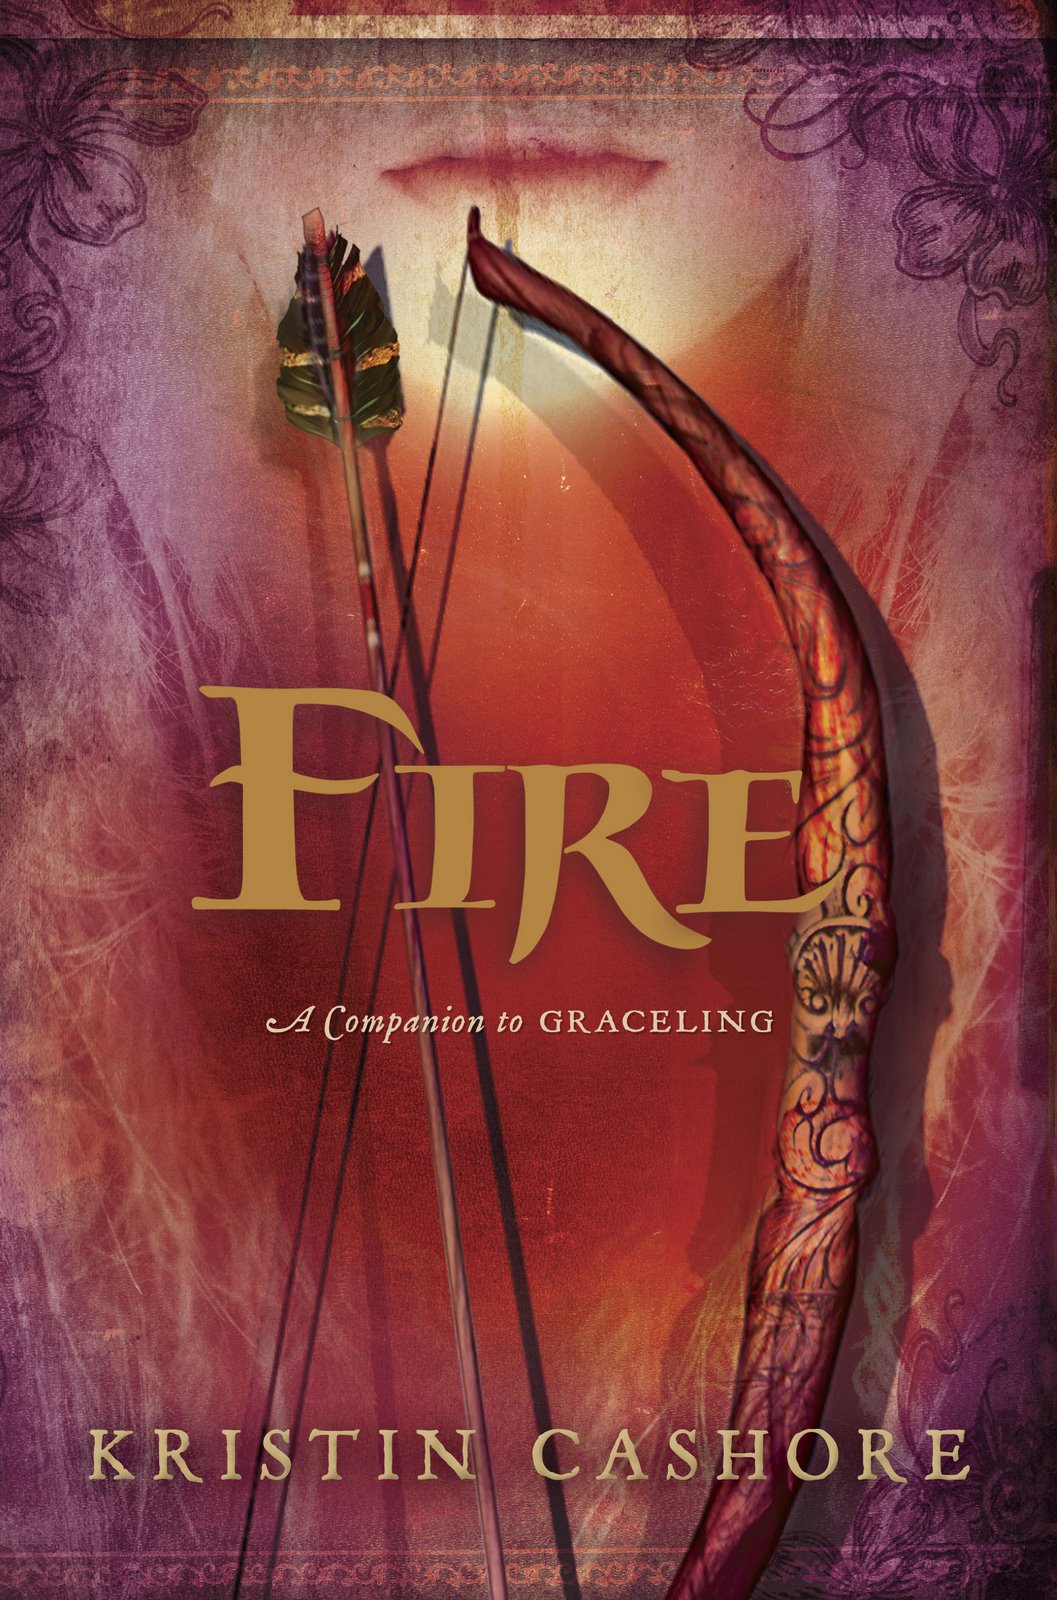 Today I am going to talk about the book Fire by Kristin Cashore. The